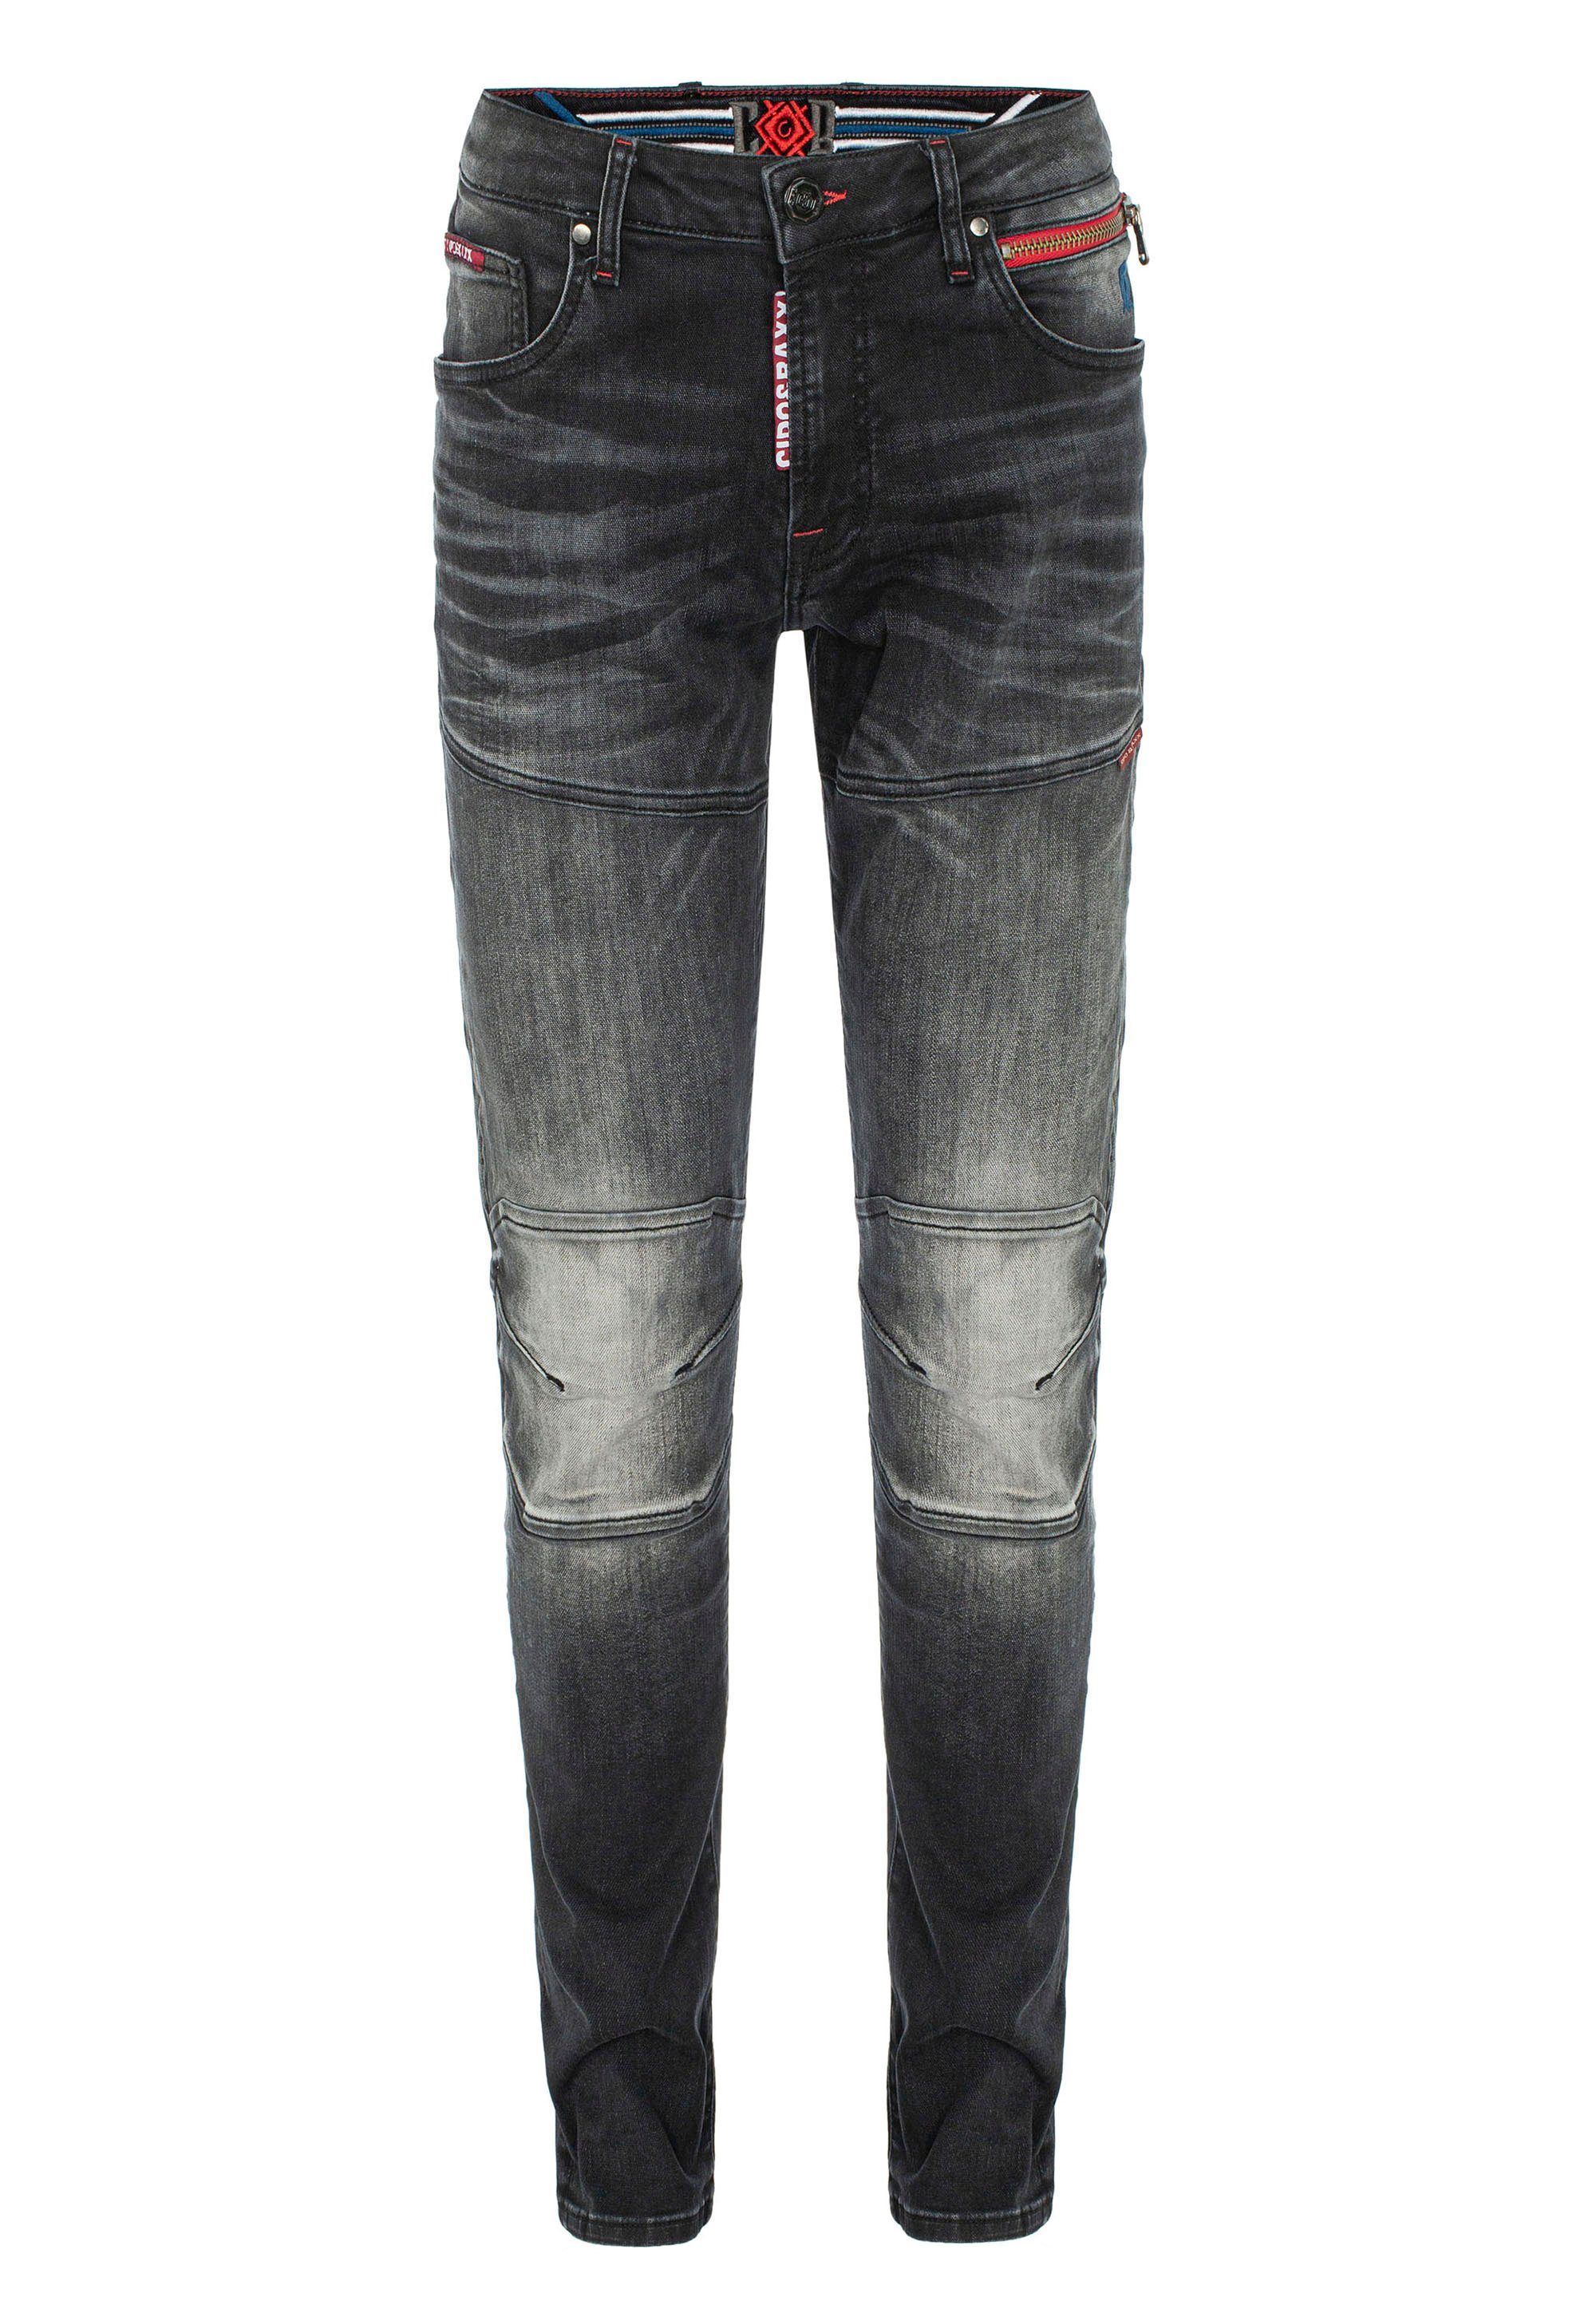 Used-Waschung Baxx & Straight-Jeans Cipo cooler mit